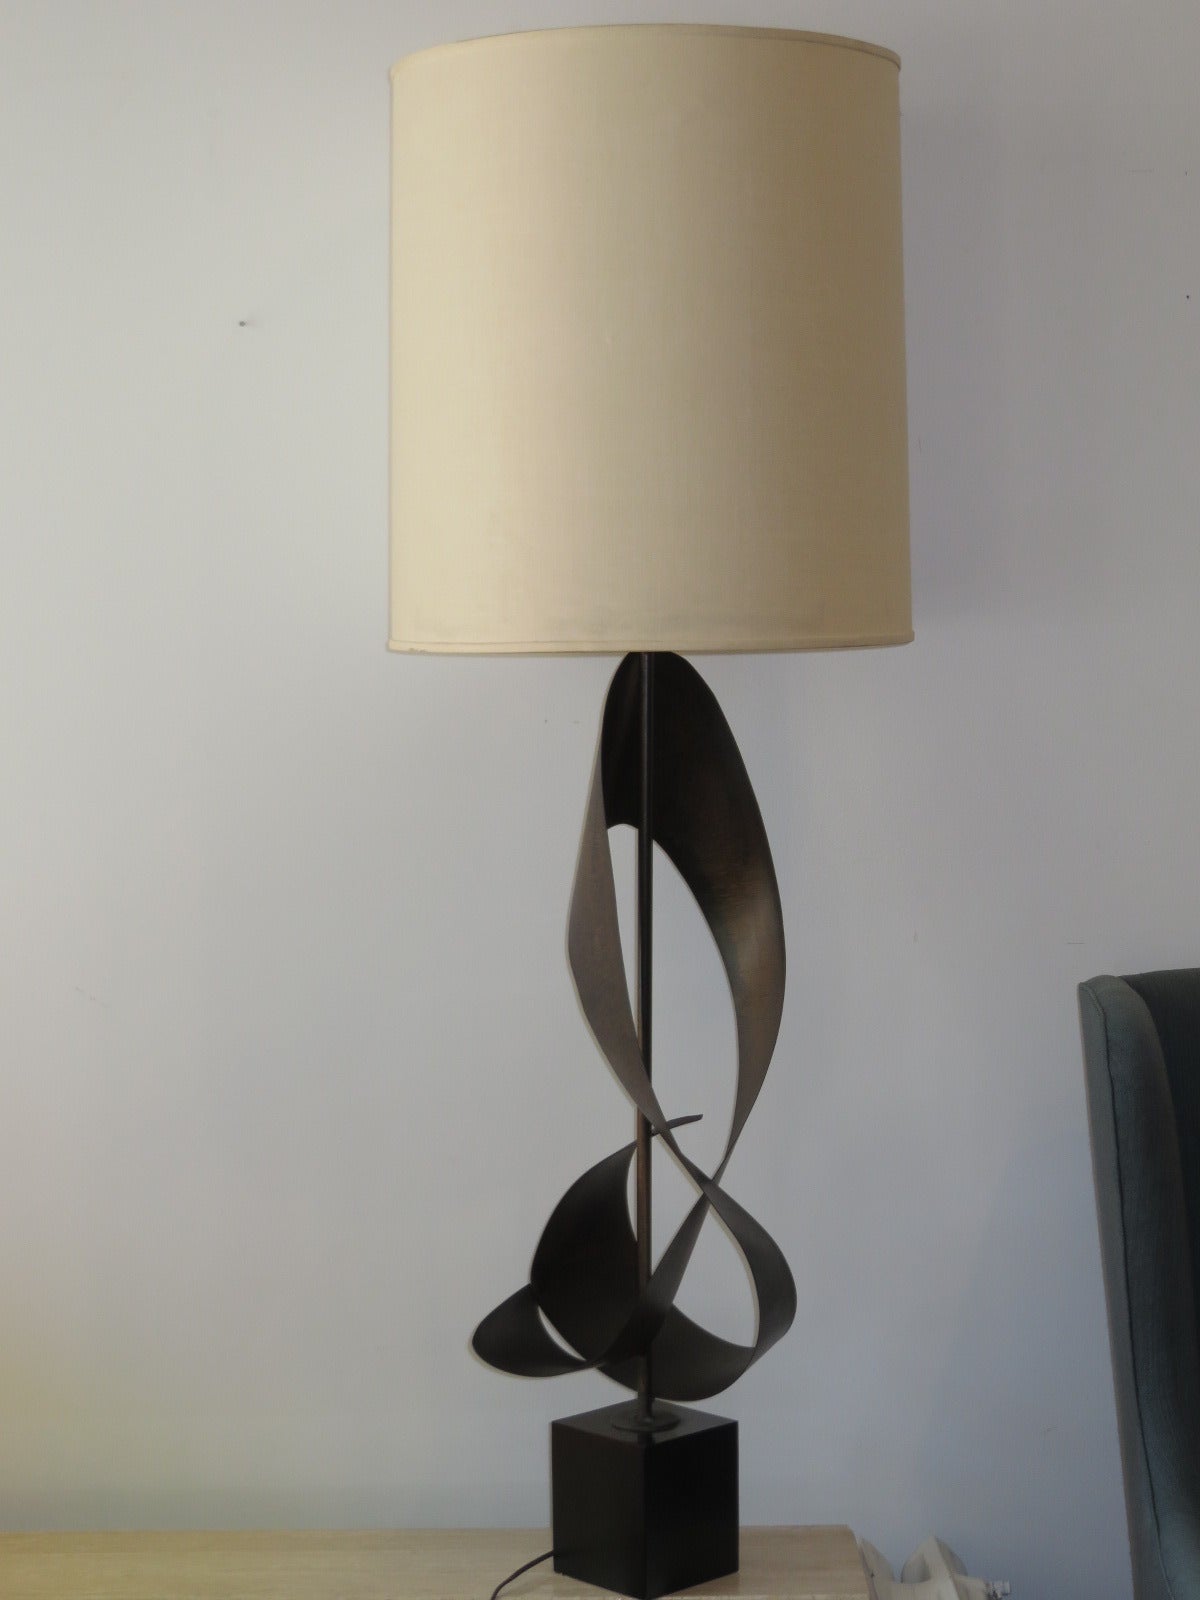 The sculptural patinated steel table lamp by Harry Balmer measures 30